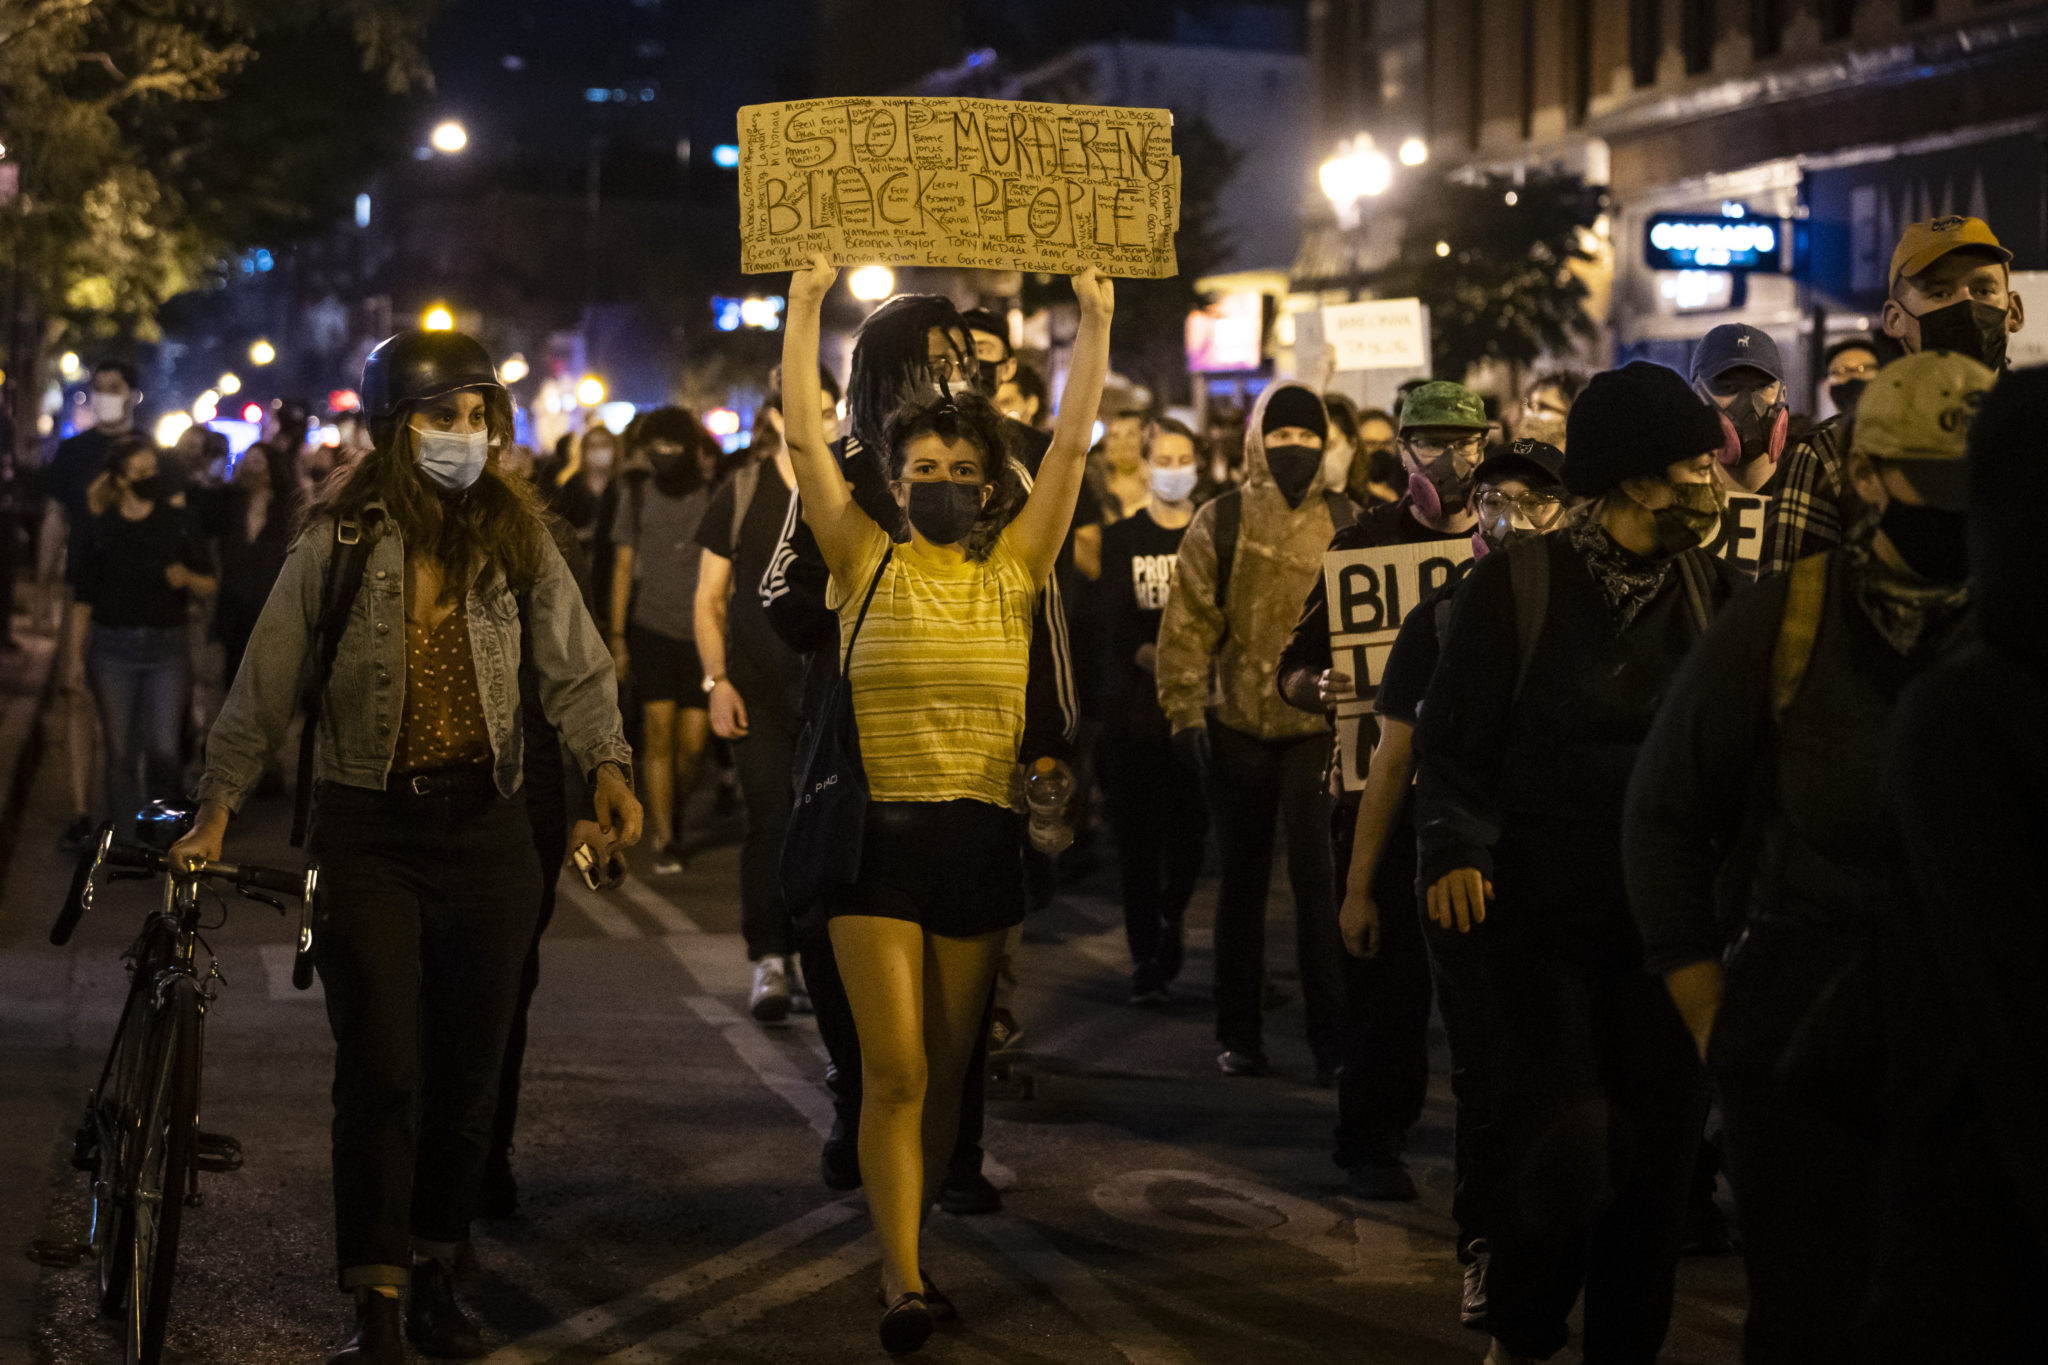 Protesters march through Wicker Park in Chicago